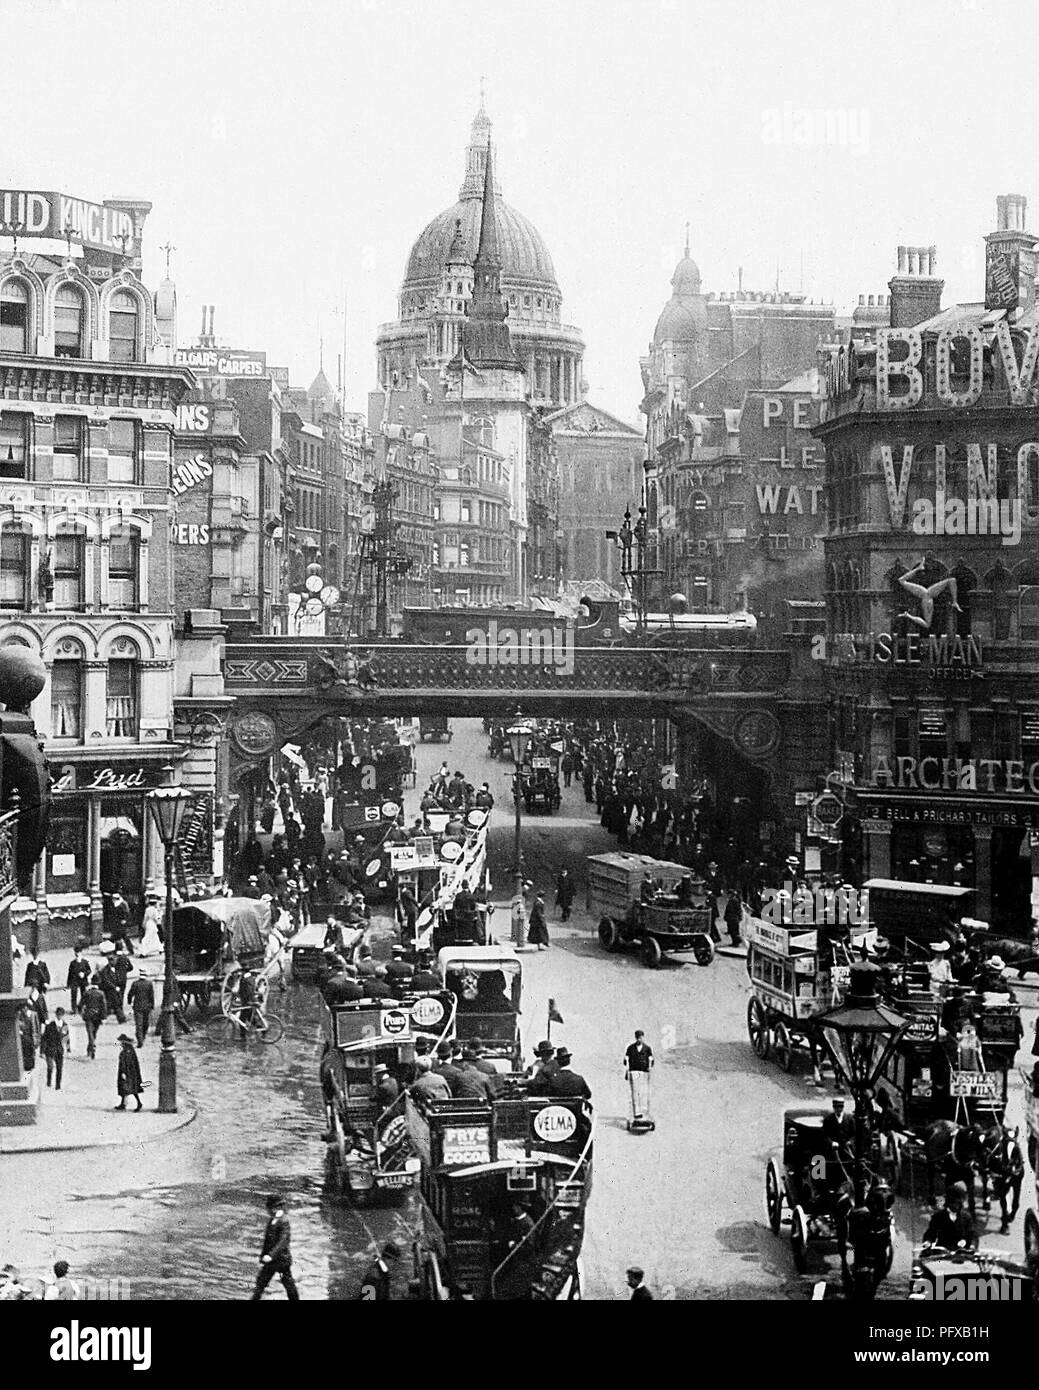 Ludgate Circus, London, Victorian period Stock Photo